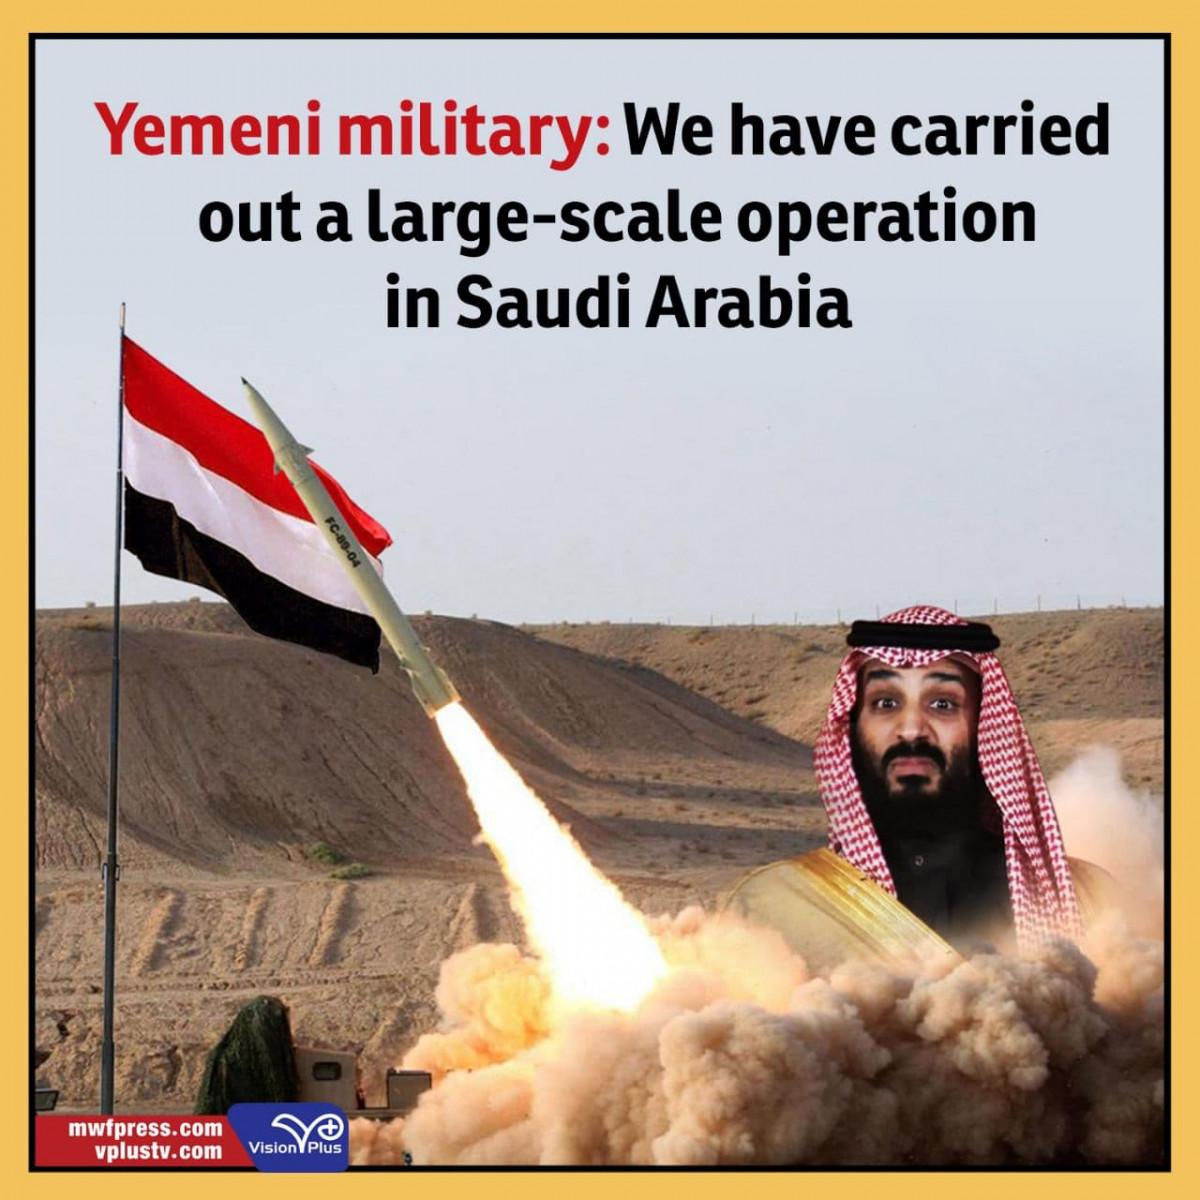 Yemeni military: We have carried out a large-scale operation in Saudi Arabia